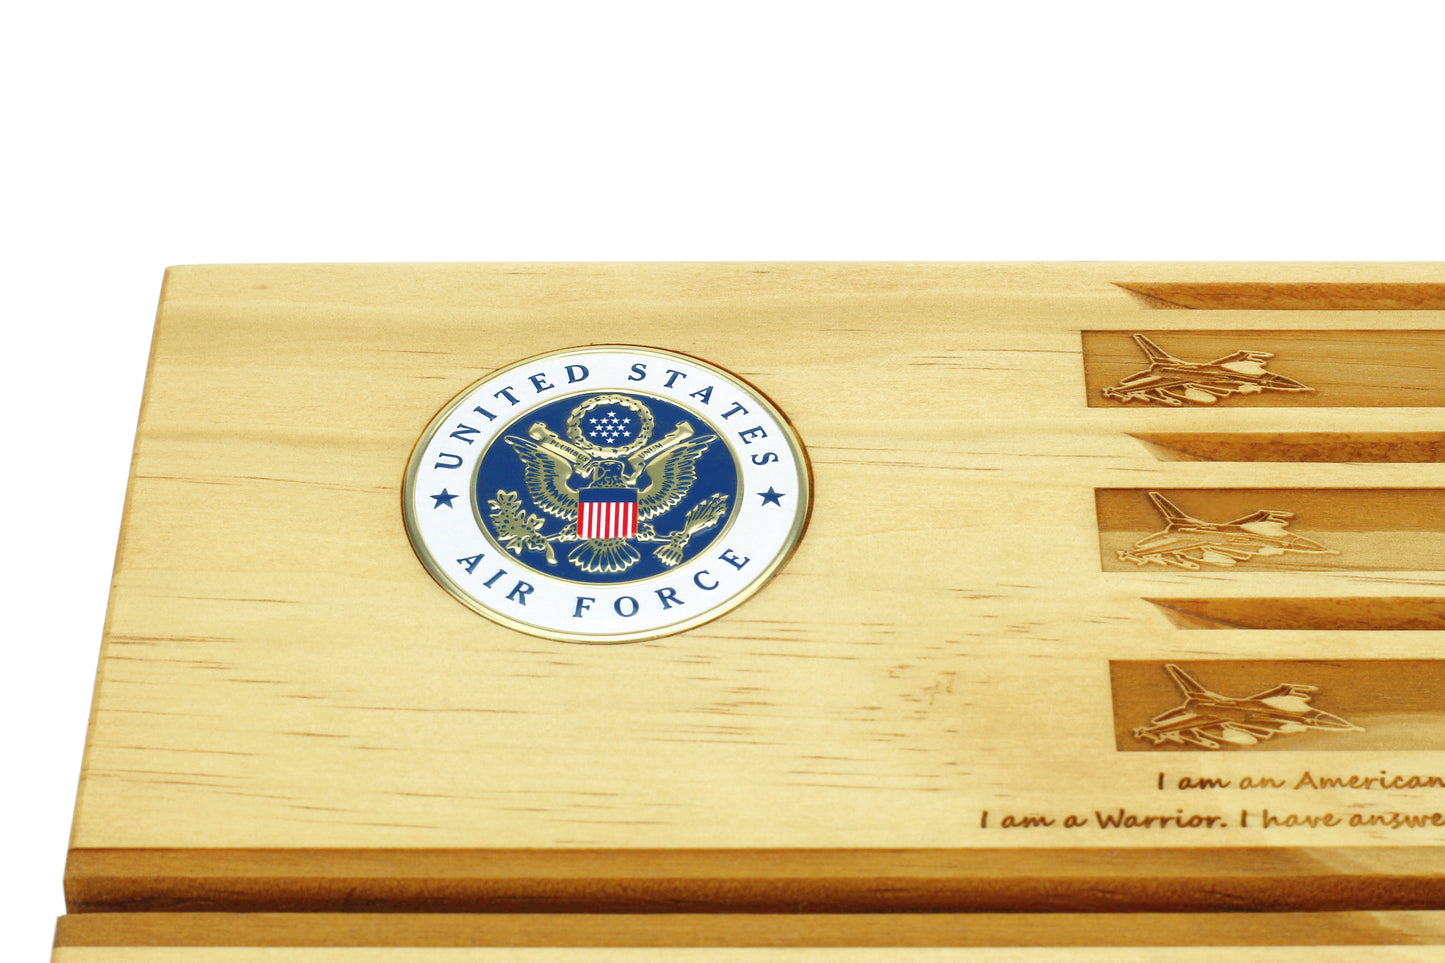 Air Force Airmen's Creed Challenge Coin Display - Personalized - Blonde